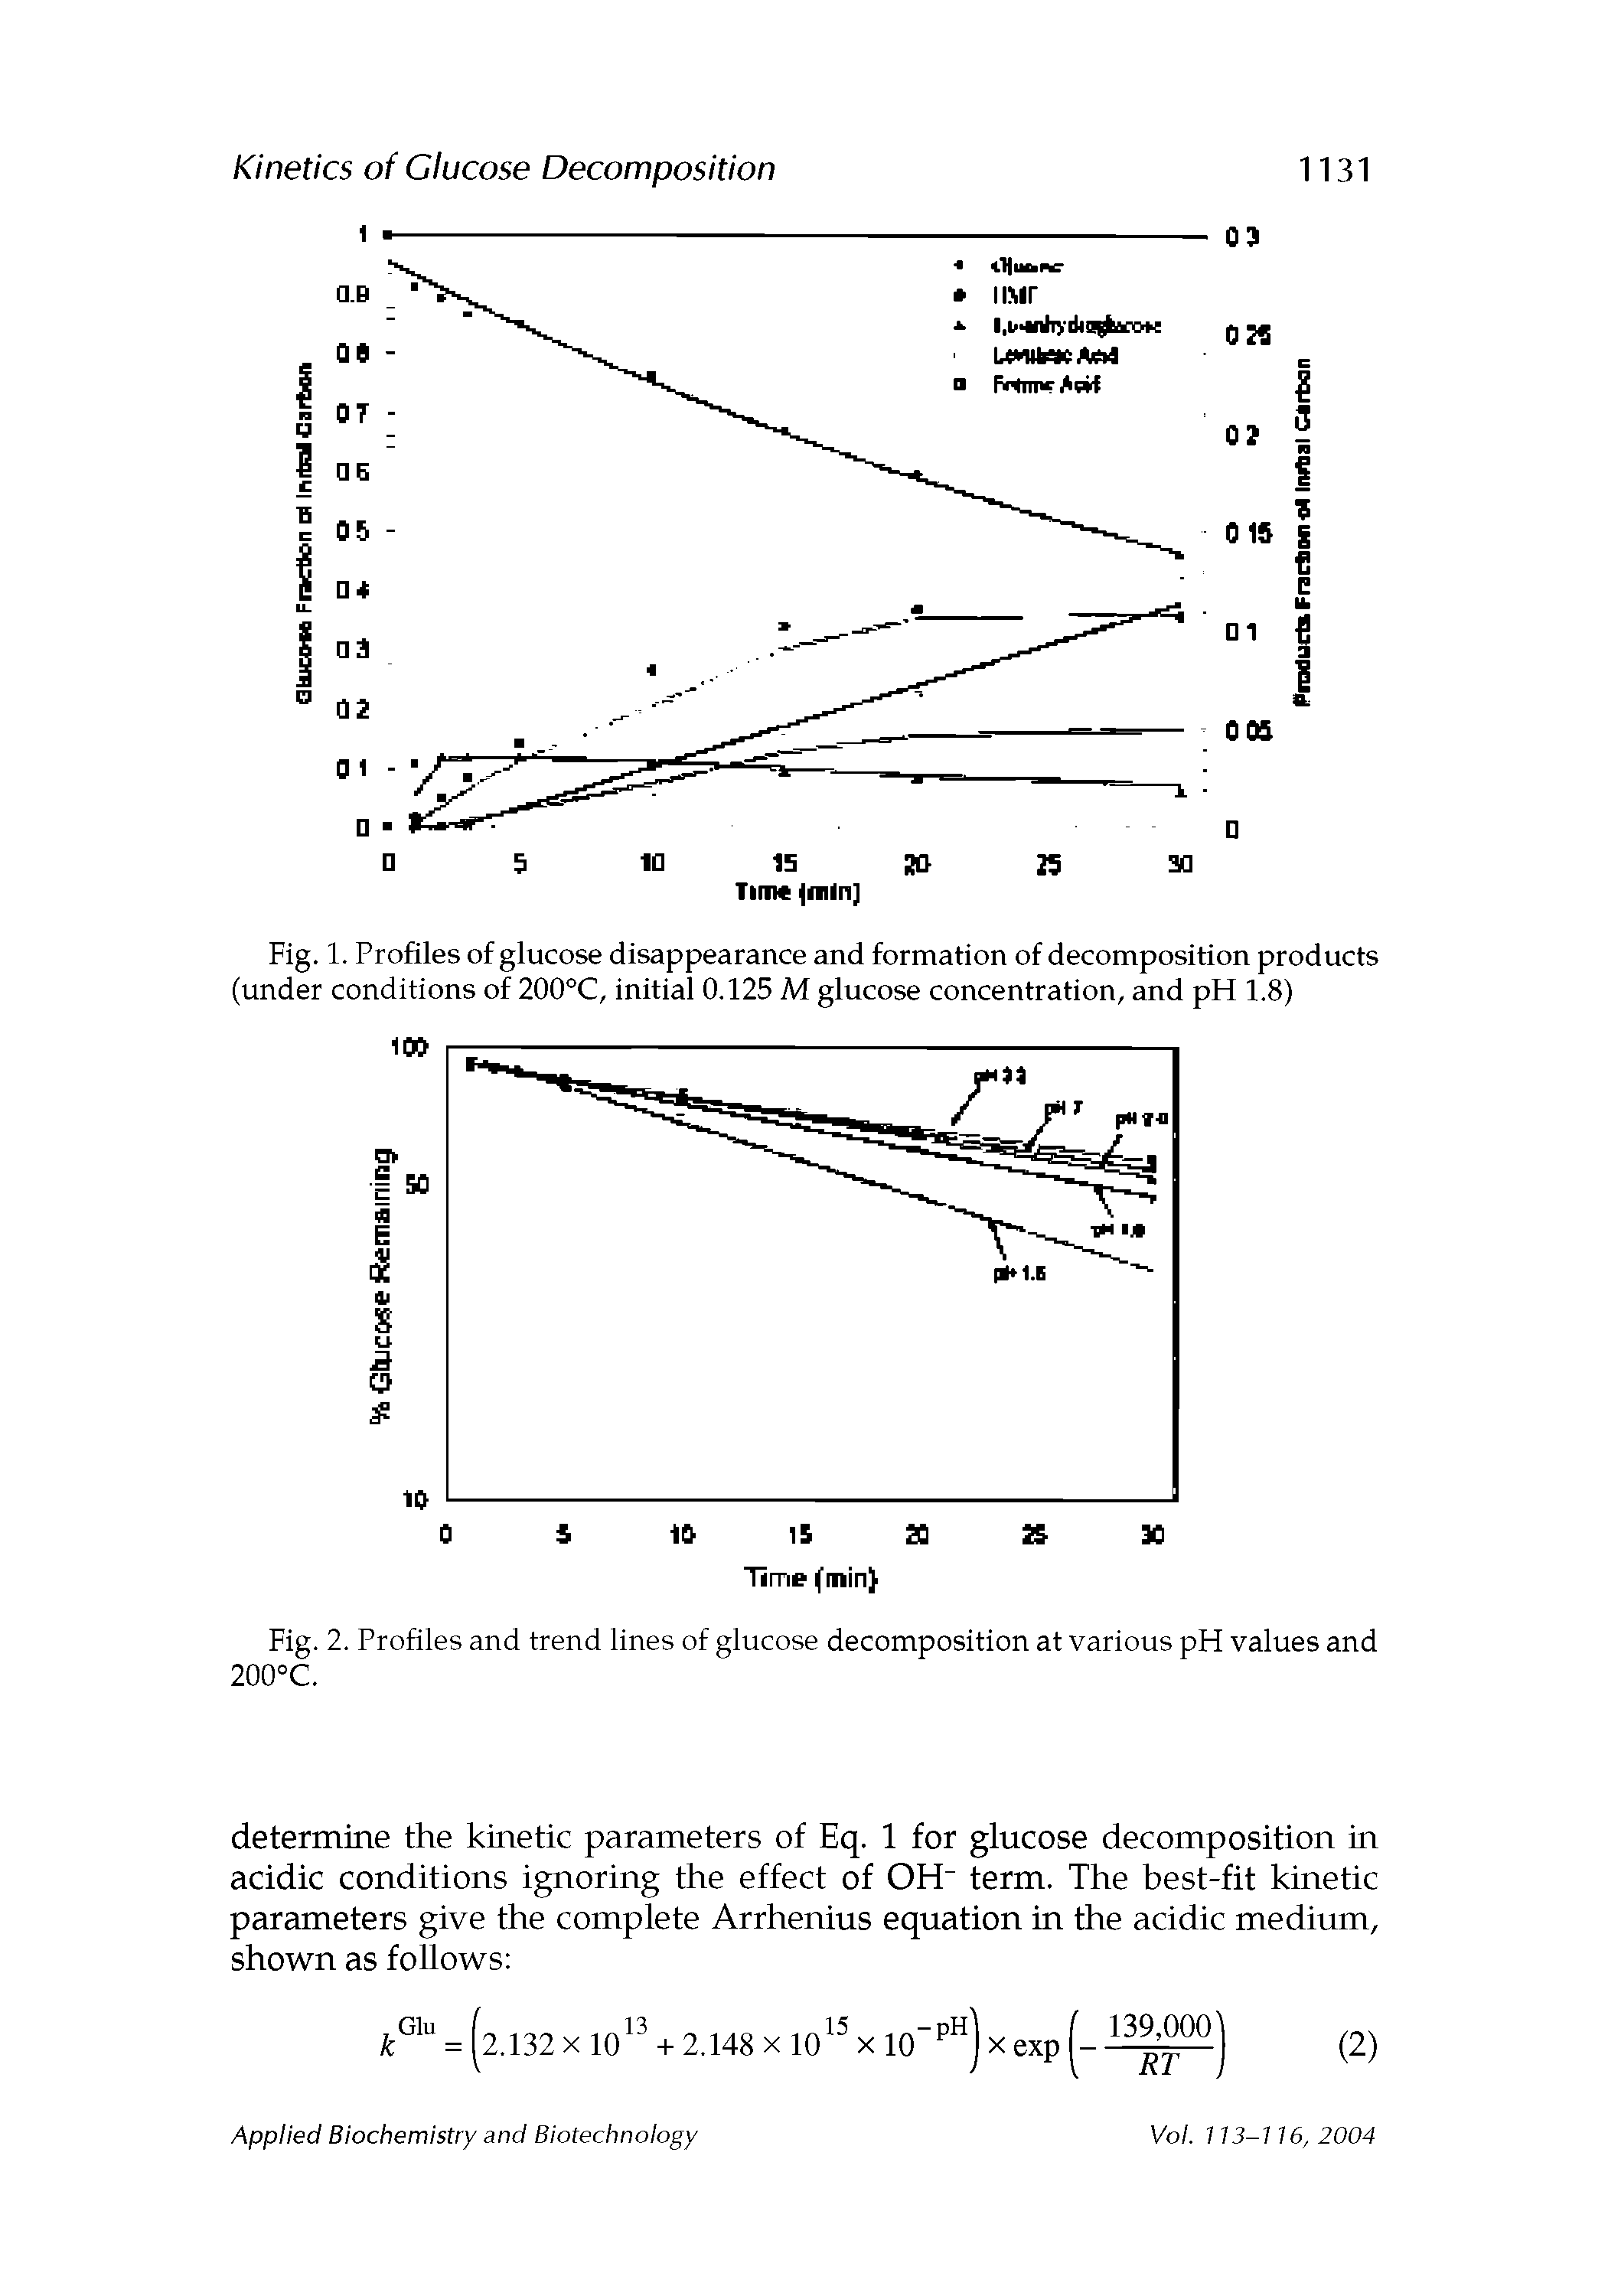 Fig. 1. Profiles of glucose disappearance and formation of decomposition products (under conditions of 200°C, initial 0.125 M glucose concentration, and pH 1.8)...